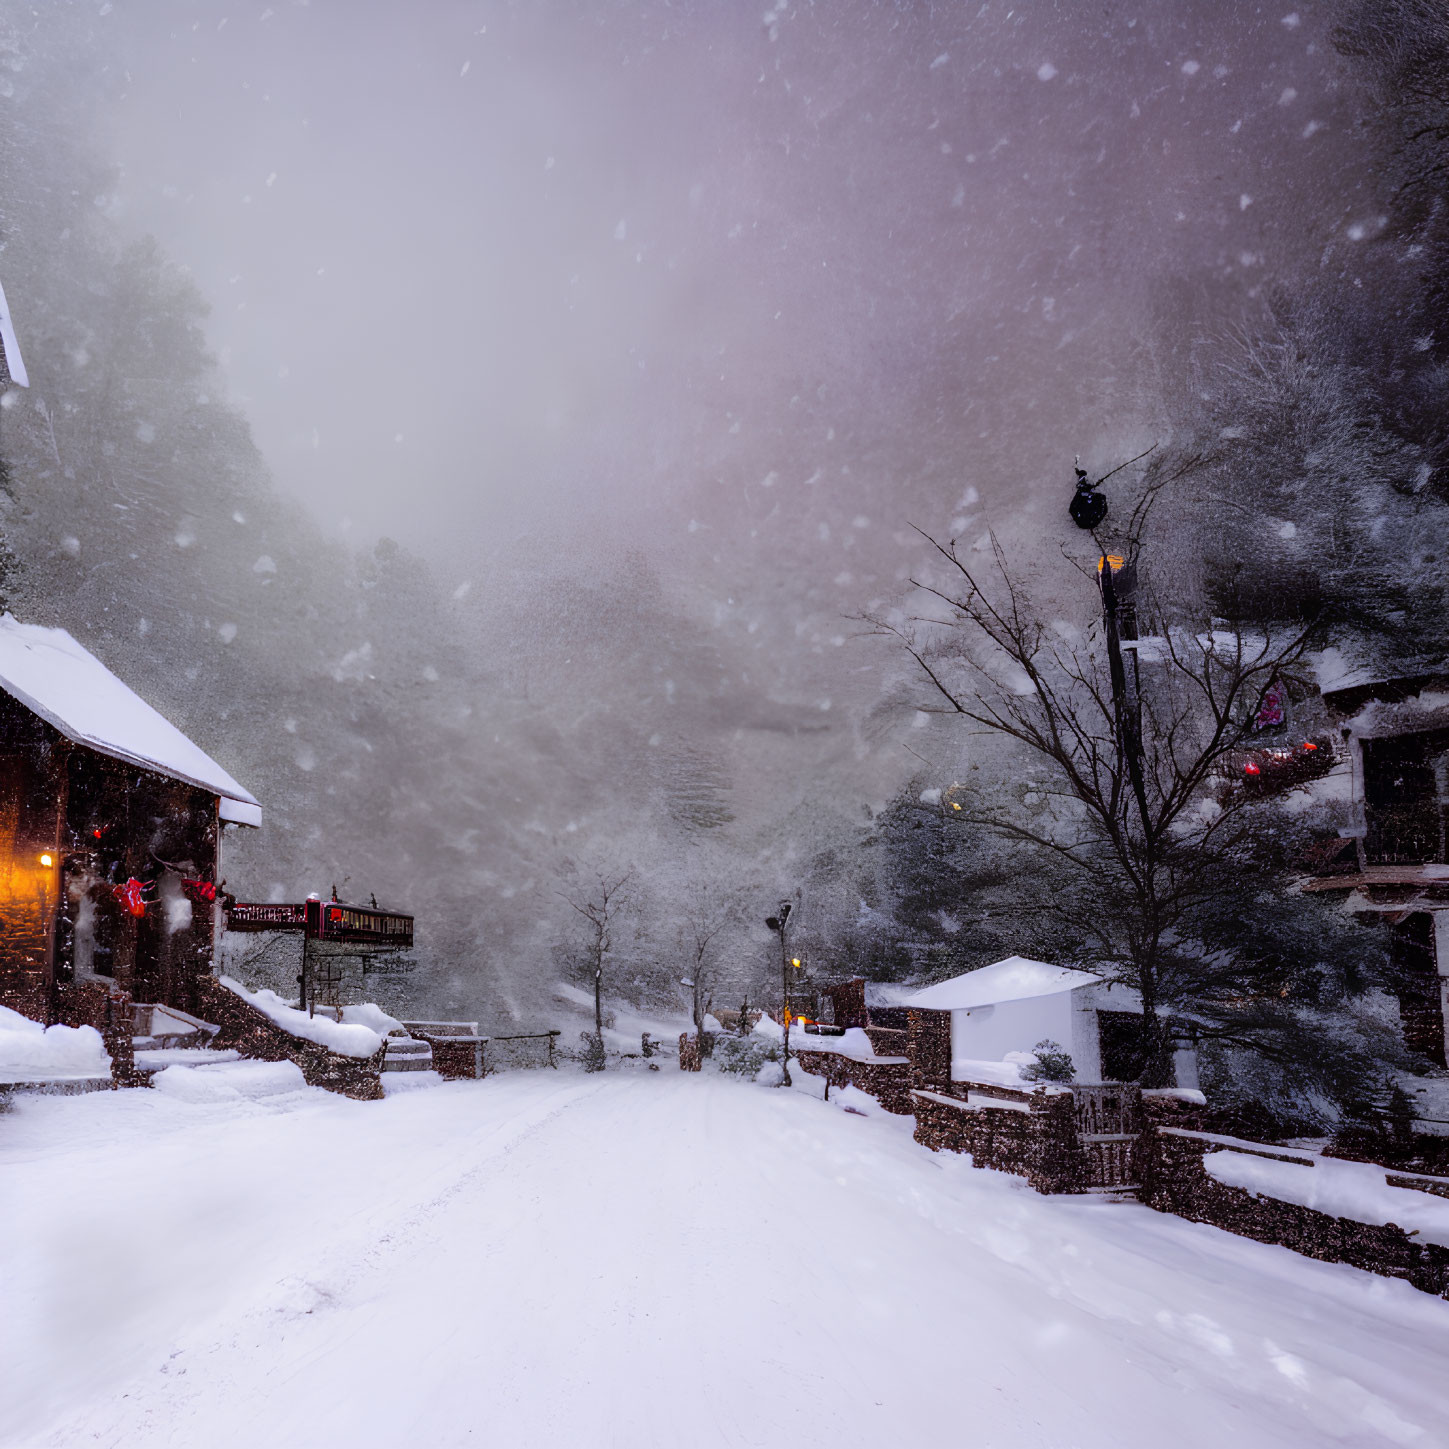 Snow-covered street with rustic buildings and overcast sky